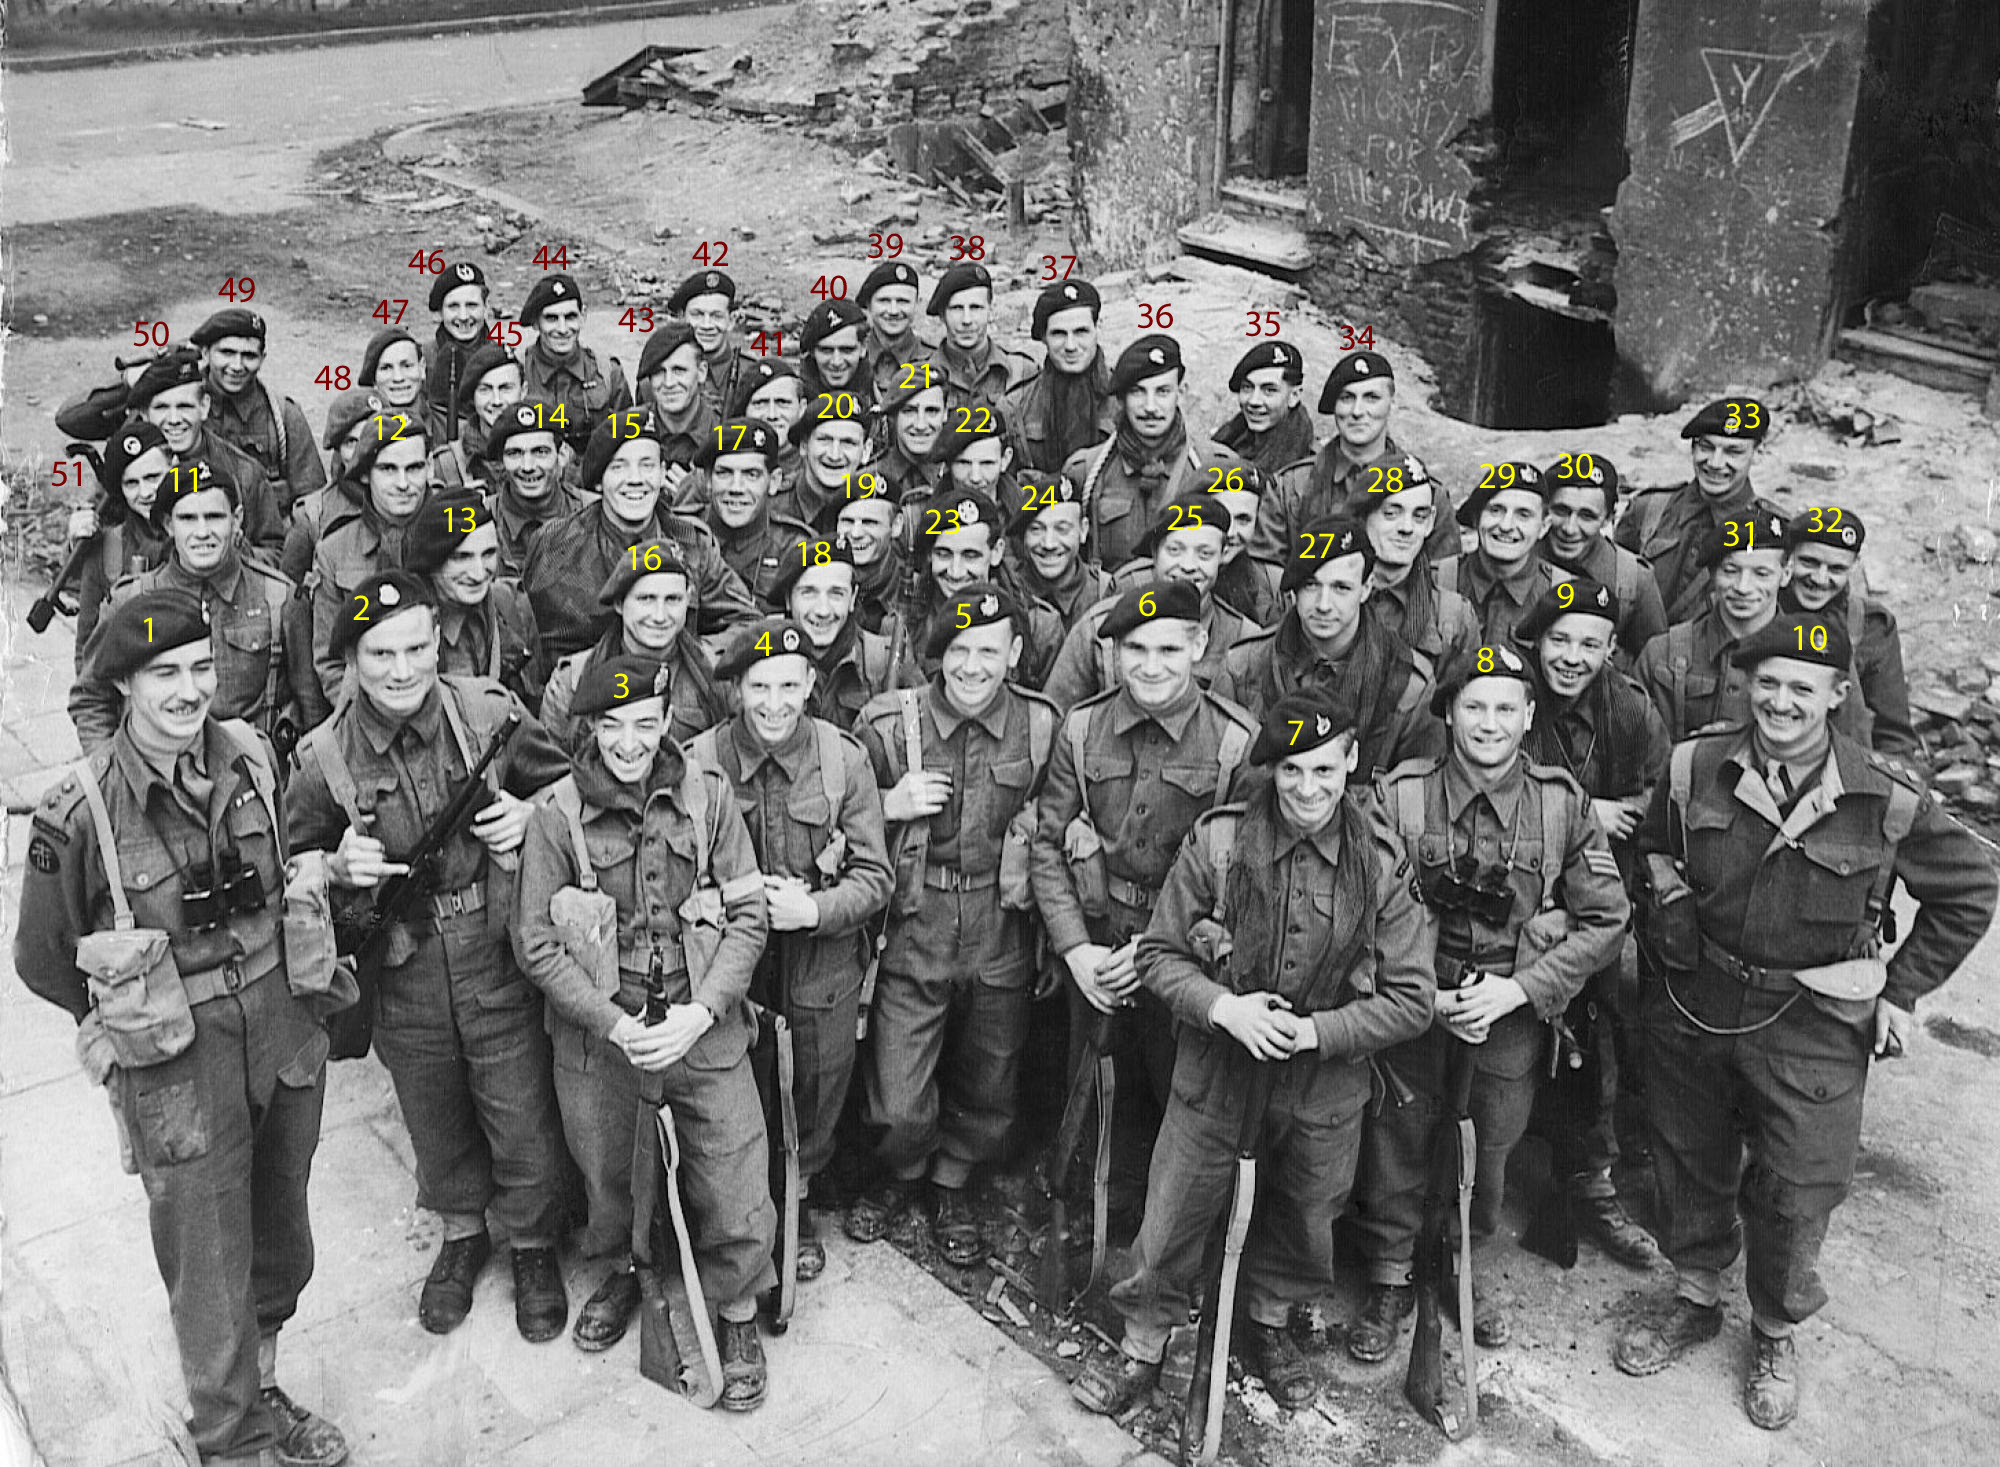 No 3 Commando 1 troop at limehouse 1944 (numbered with names)